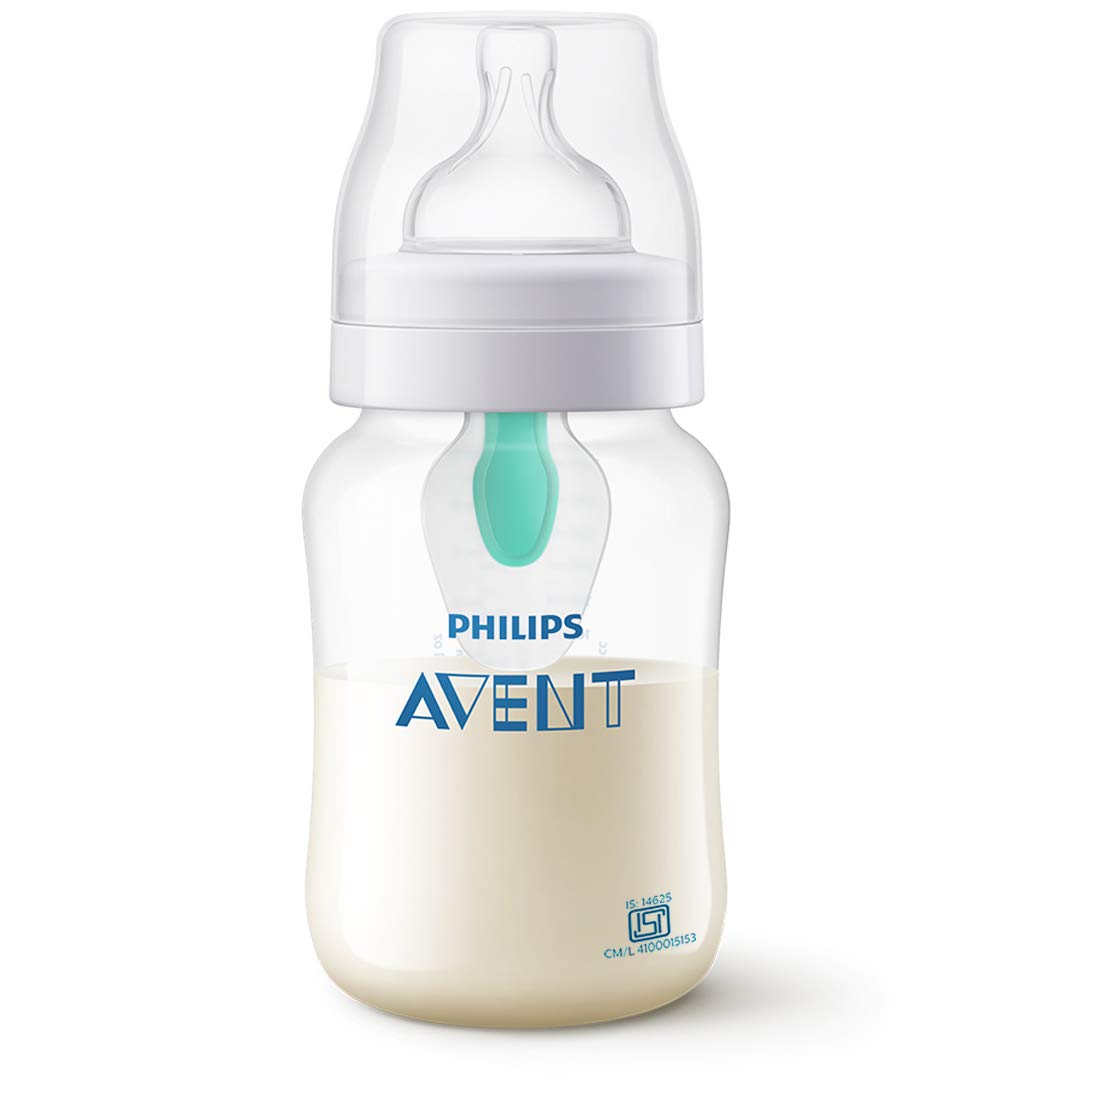 Philips Avent Anti-Colic Bottle with Airfree Vent - 4 oz